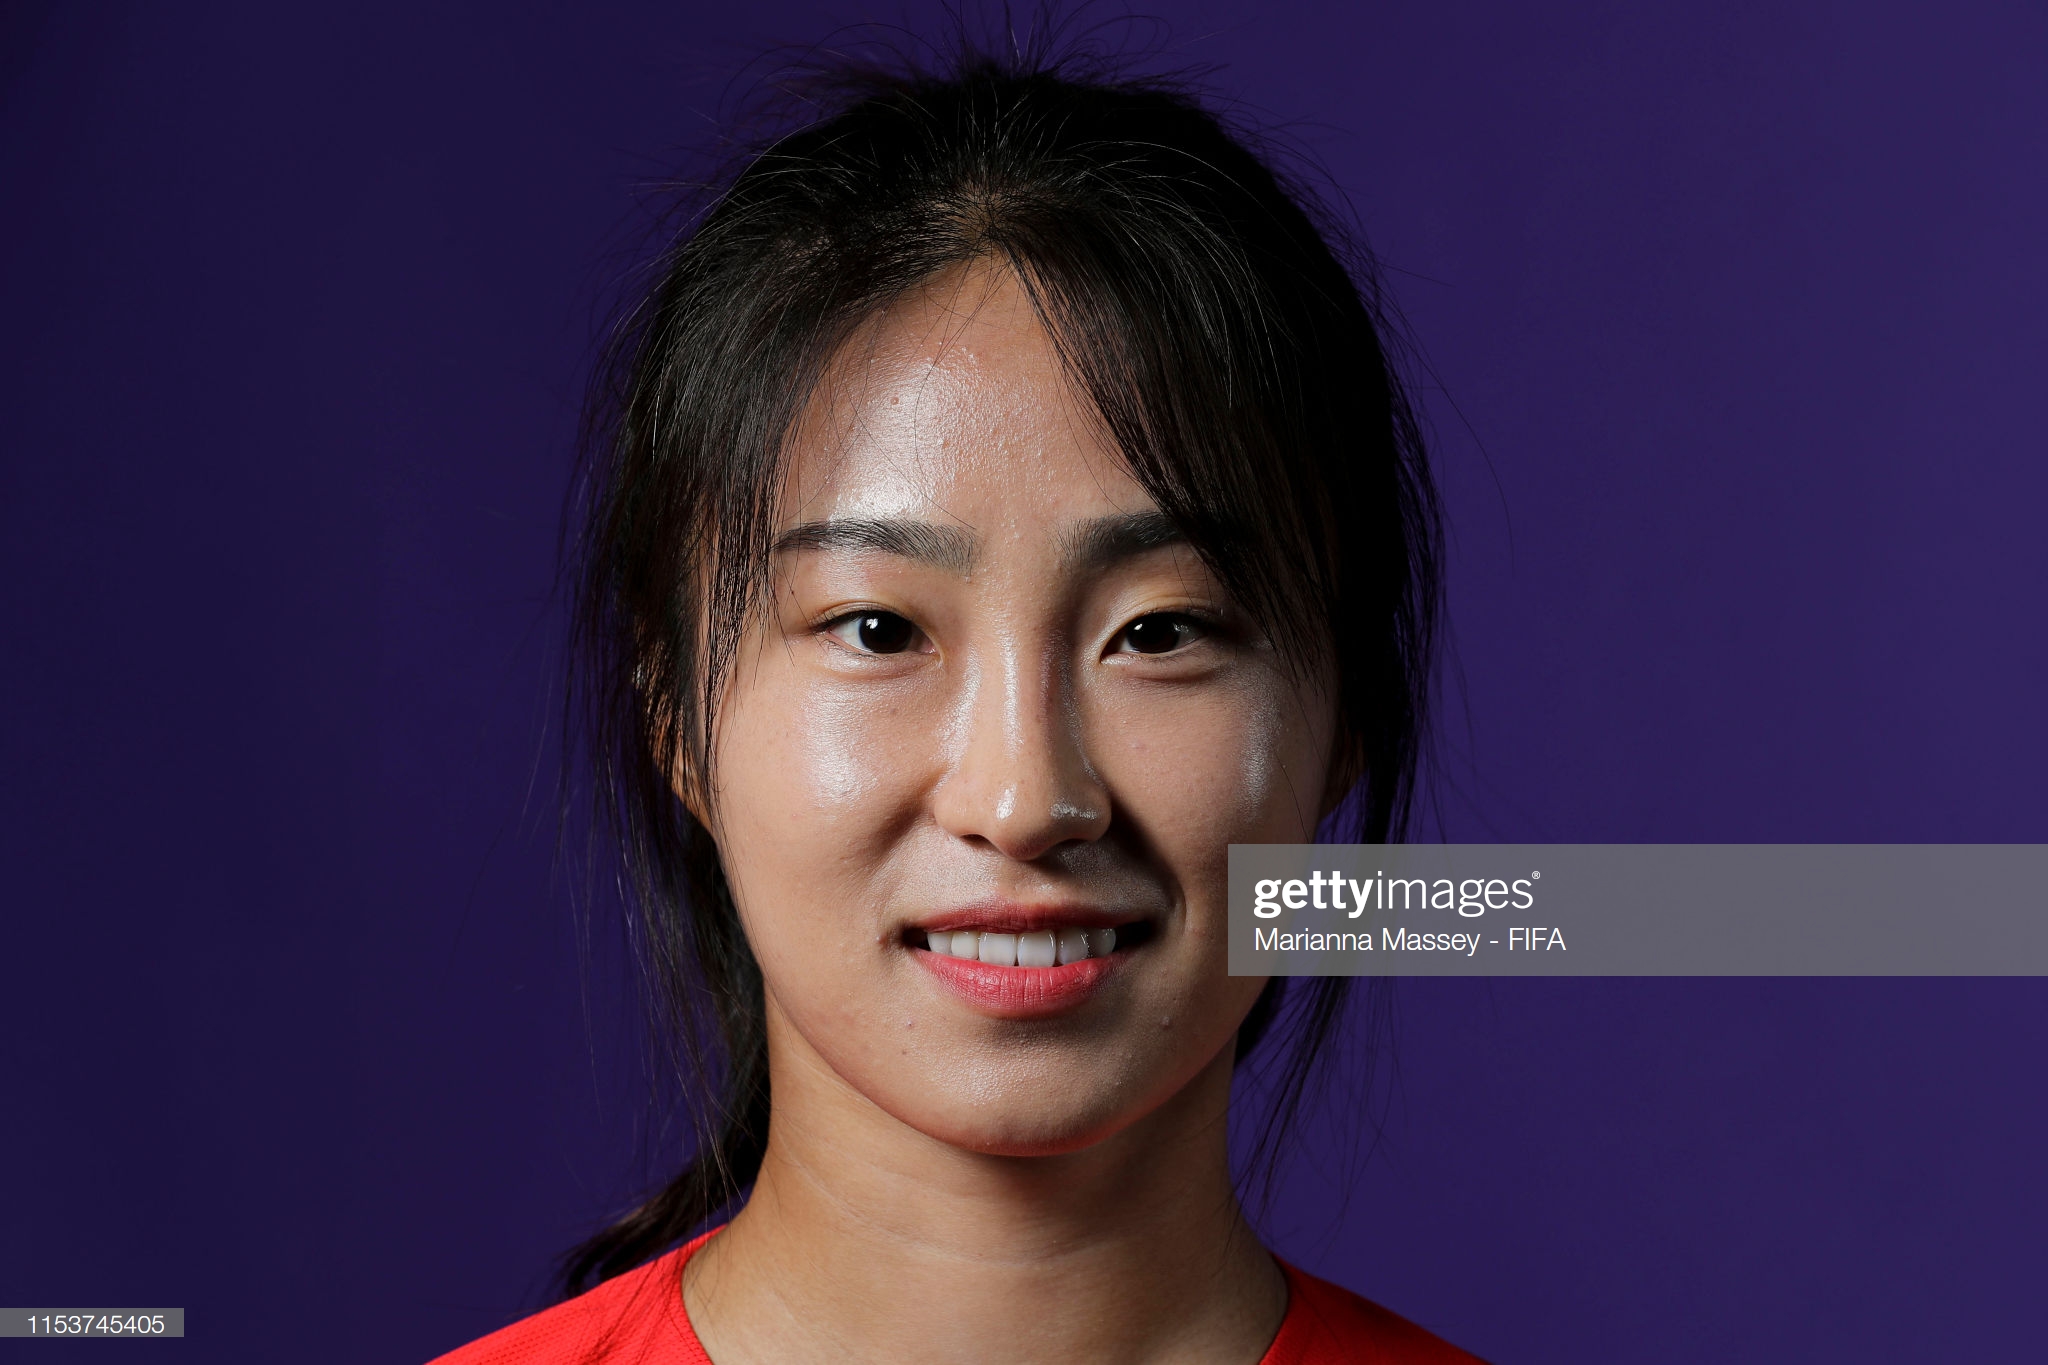 gettyimages-1153745405-2048x2048.jpg